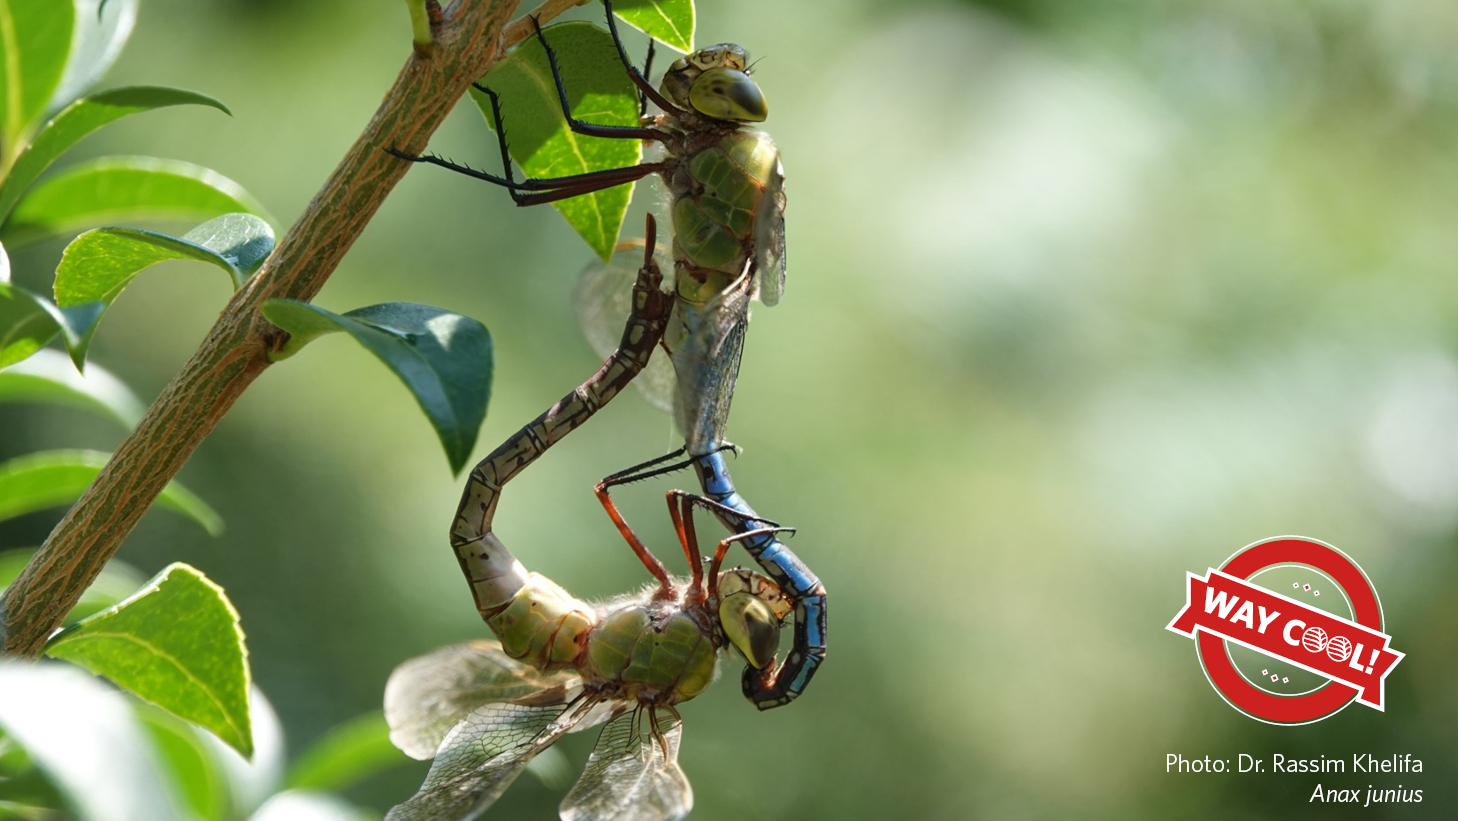 Two dragonflies (Anax junius) copulating on a branch. A red Way Cool ribbon logo on the lower left hand corner. Photo by Dr. Rassim Khelifa